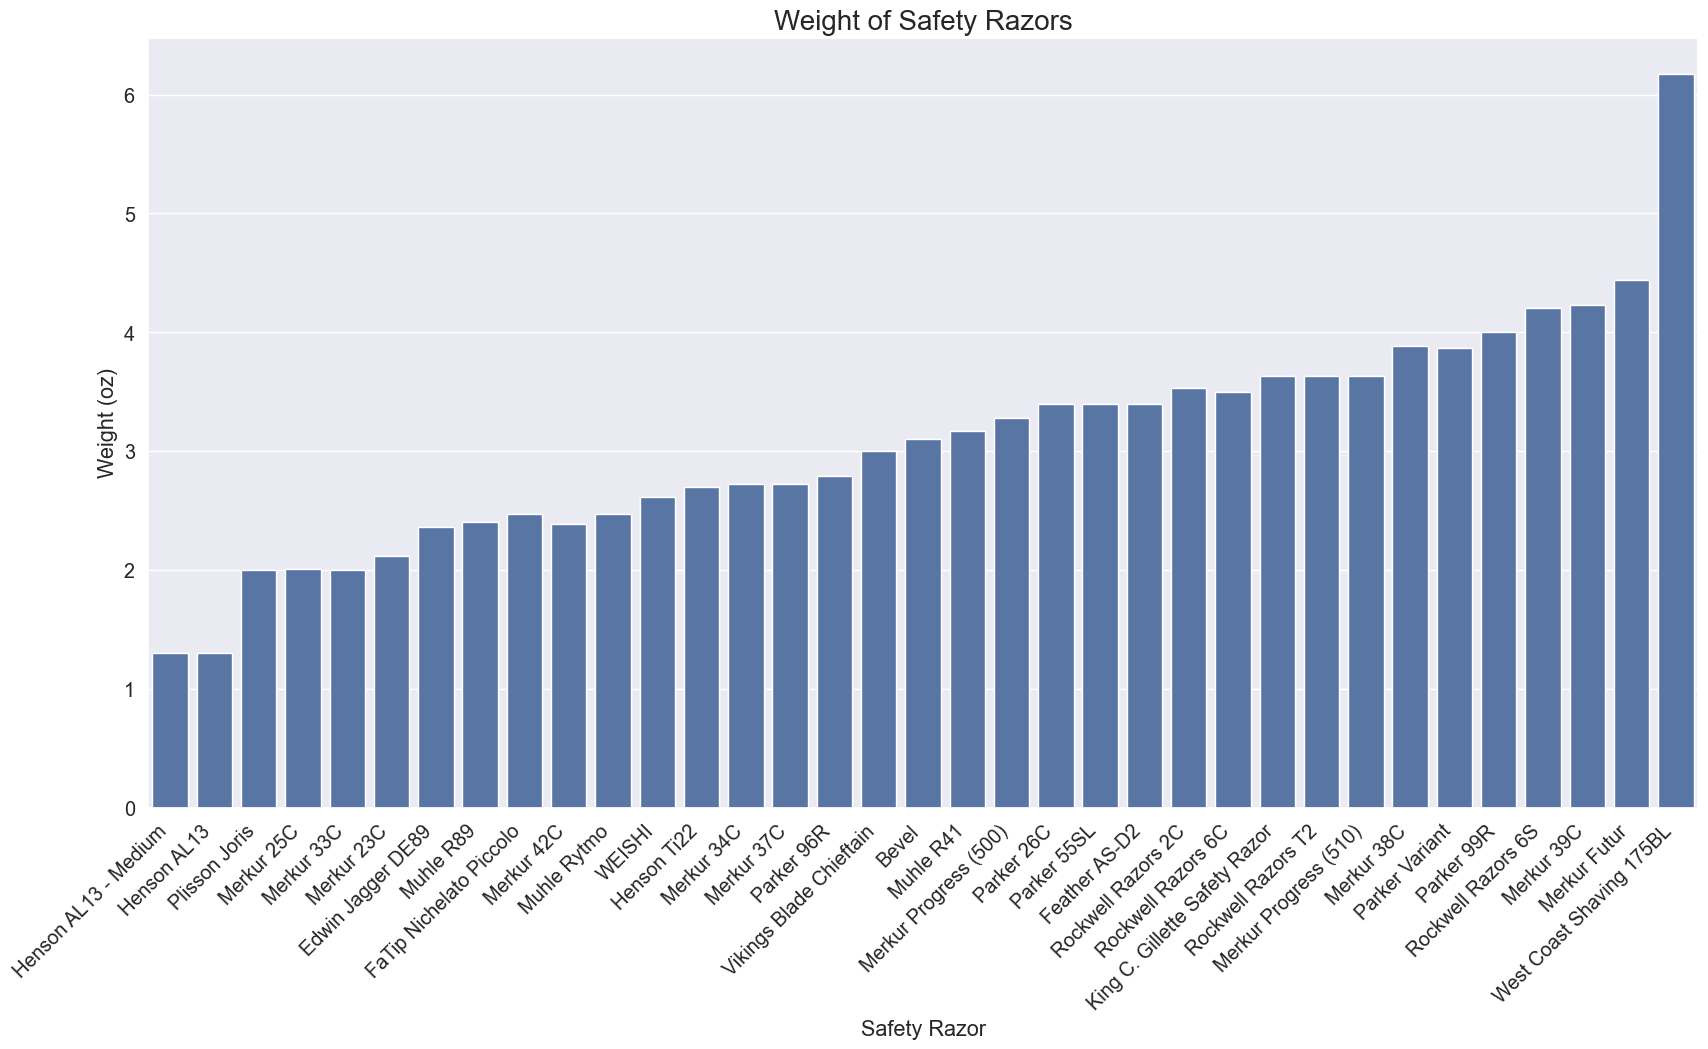 graph comparing the weight of several safety razors